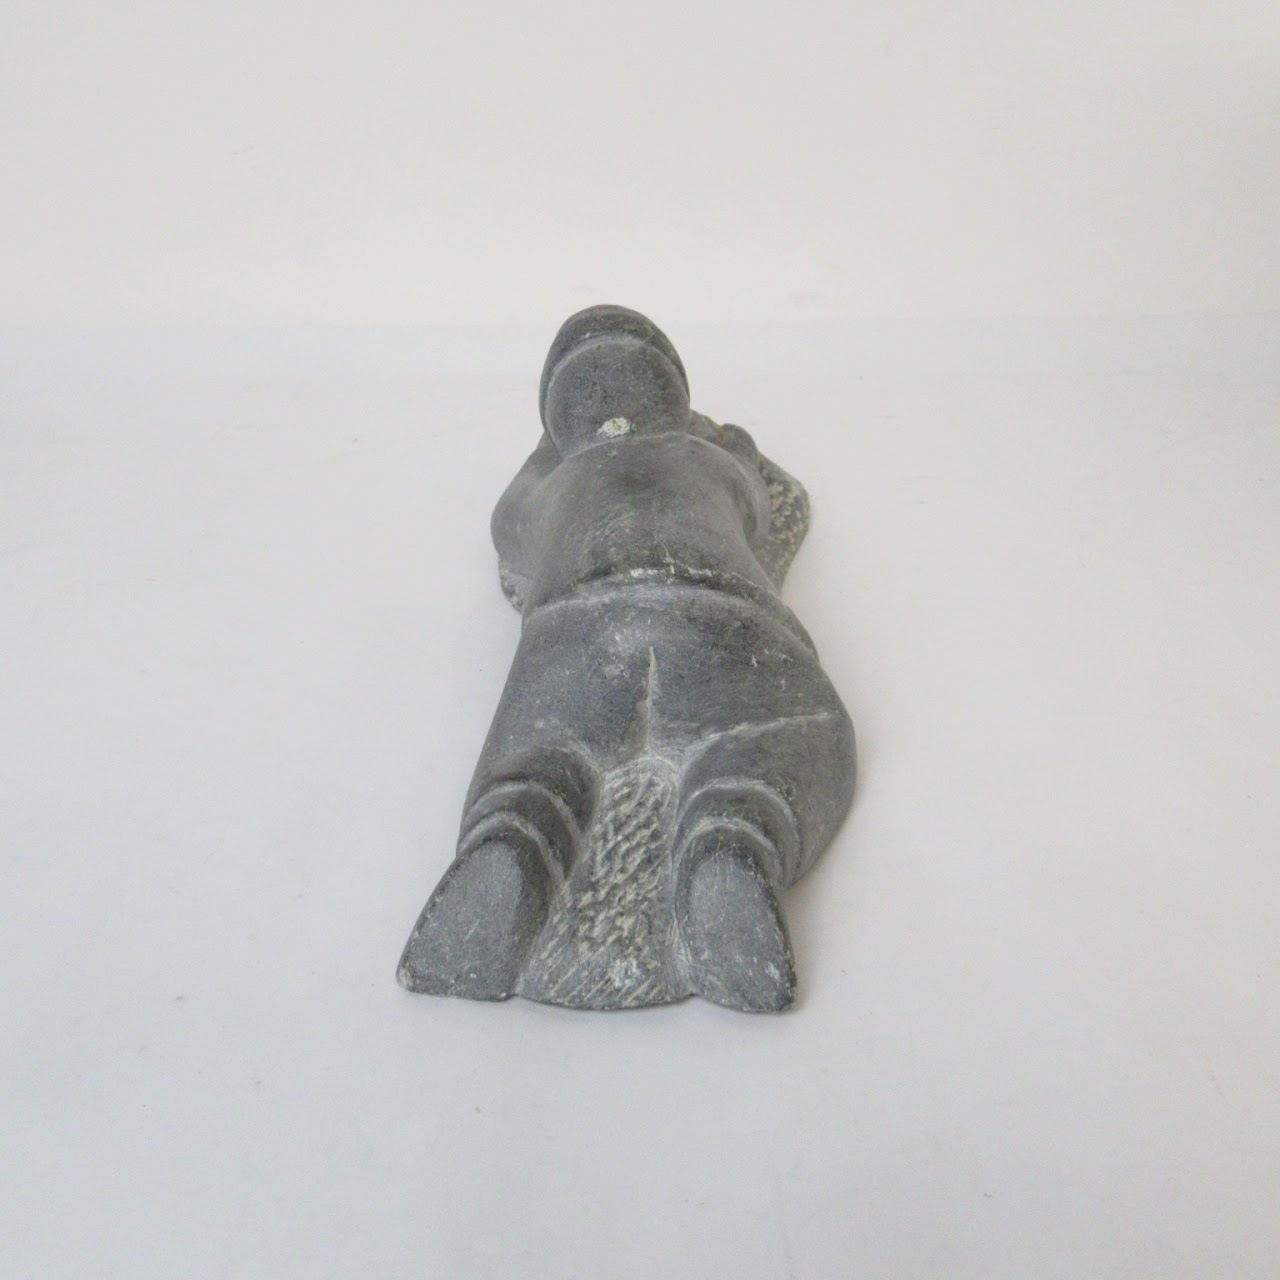 Inuit Soapstone Fisher Sculpture